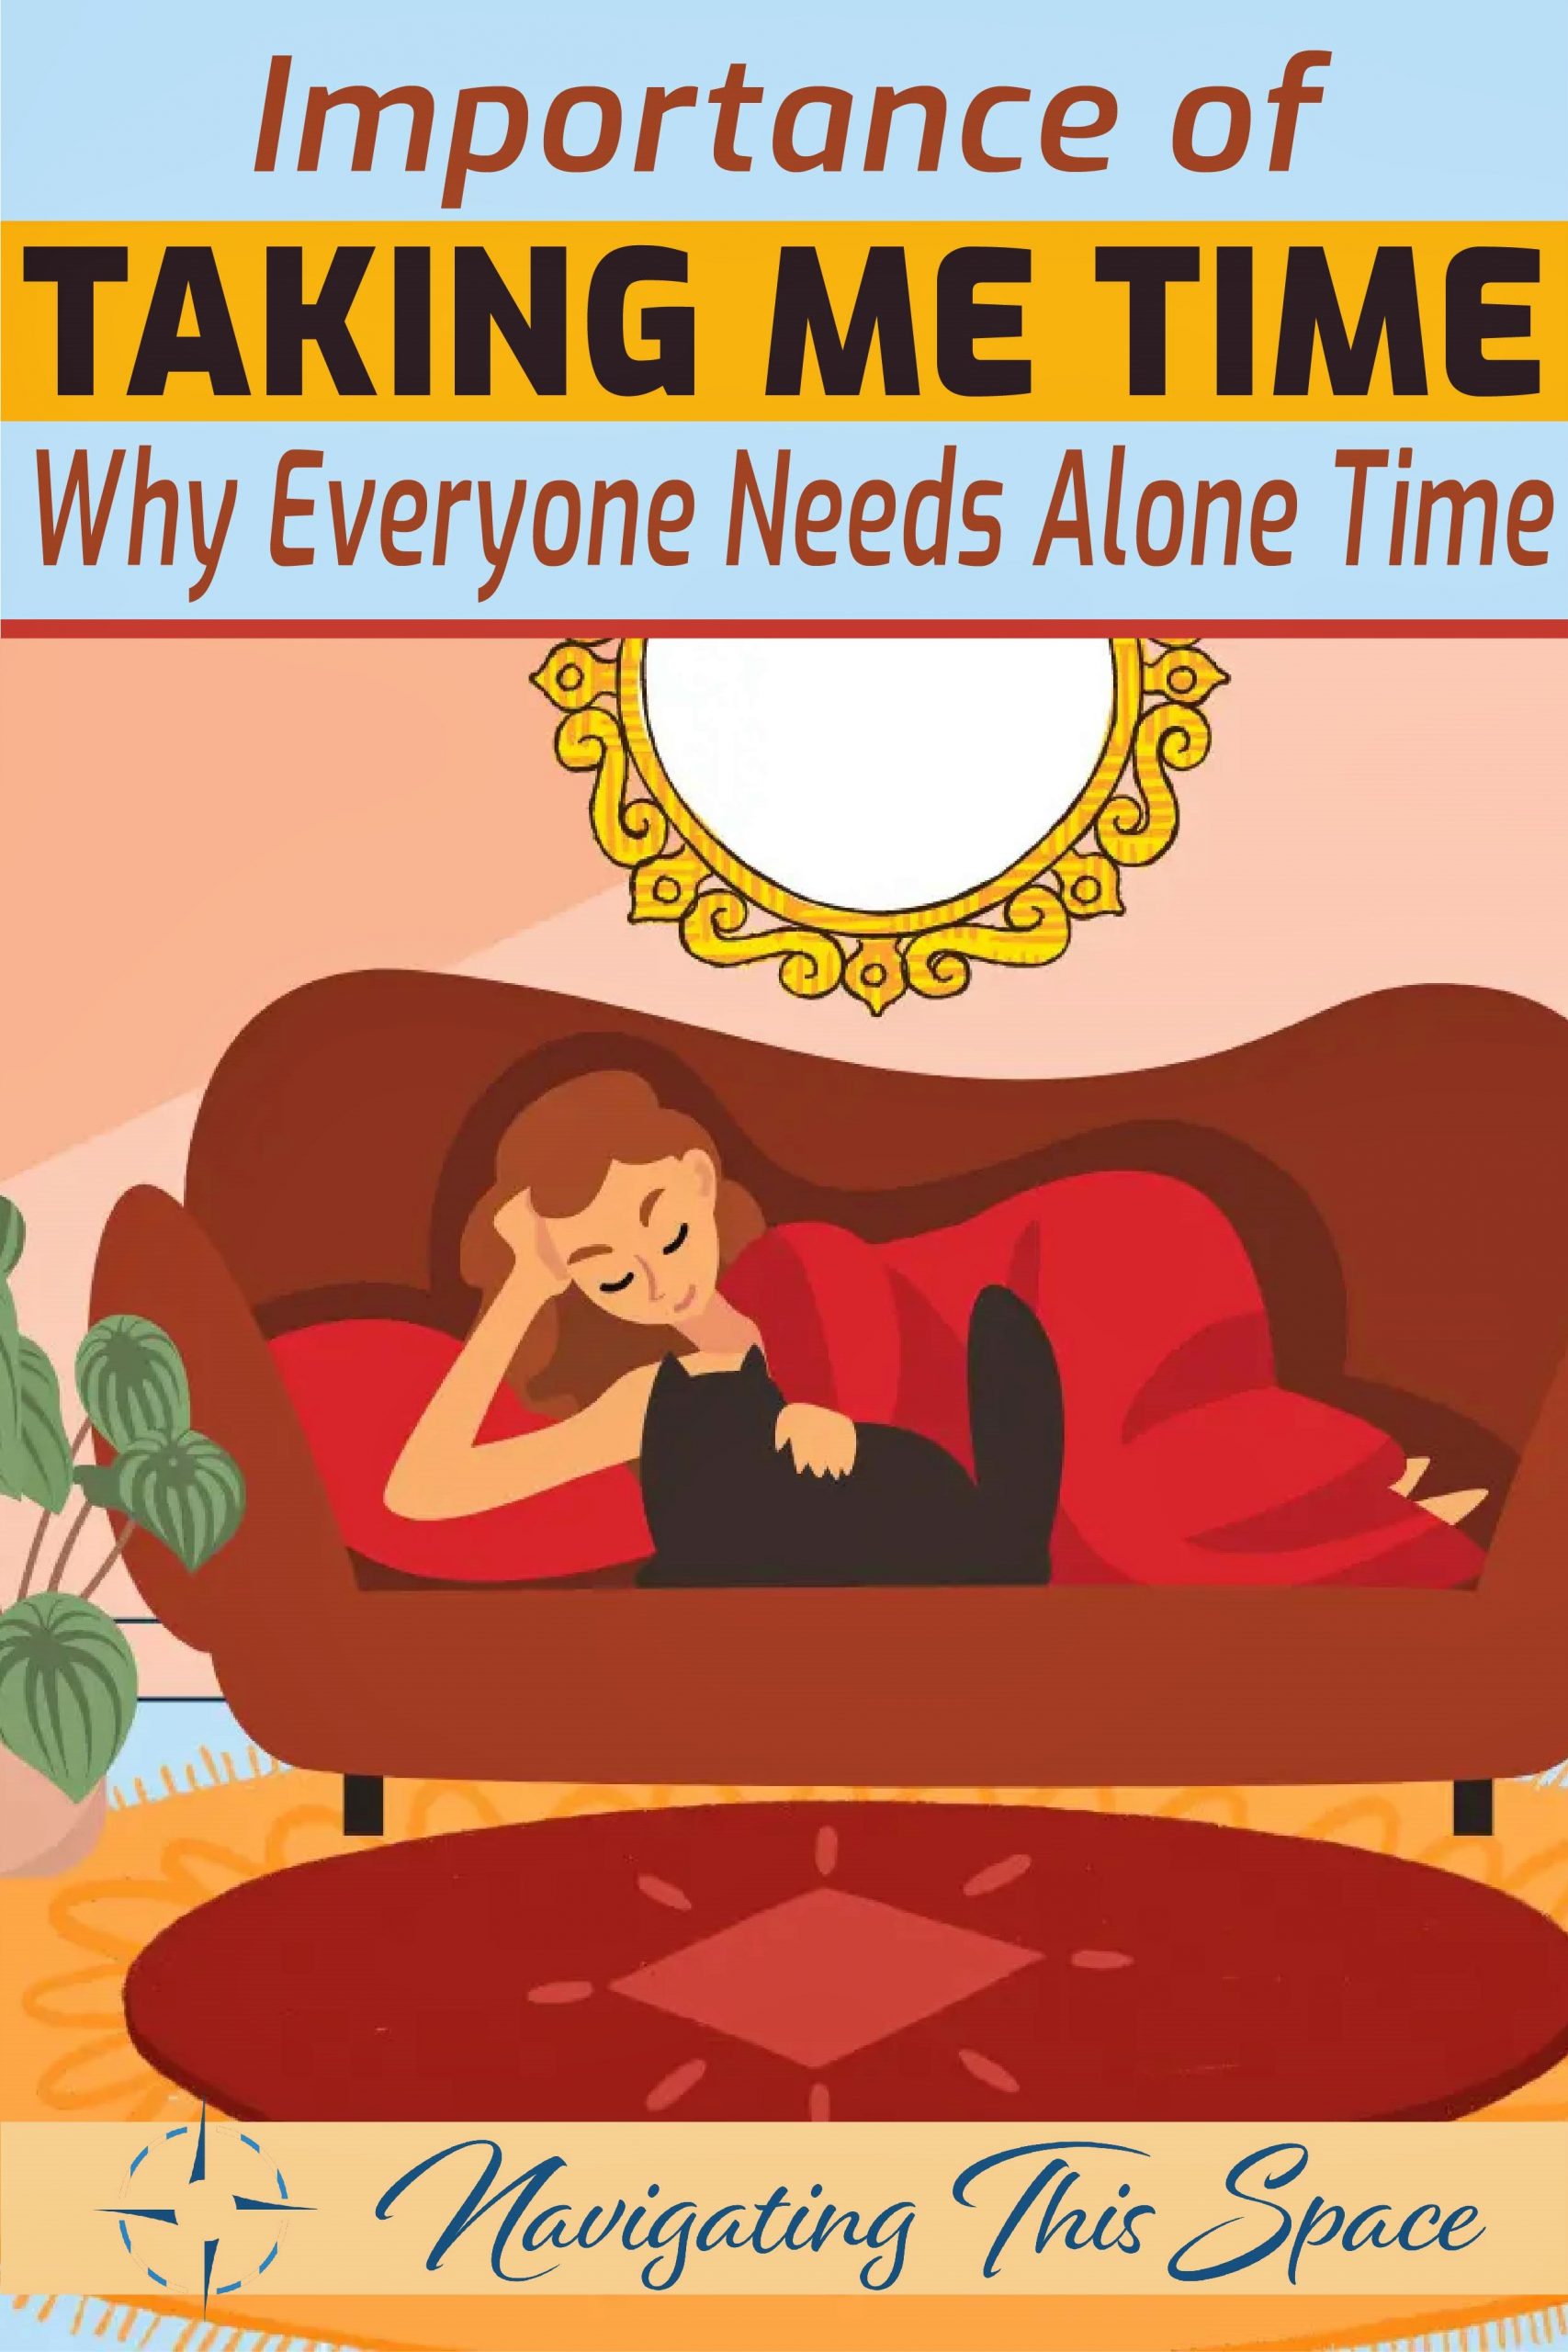 Importance of taking me time - why everyone needs alone time